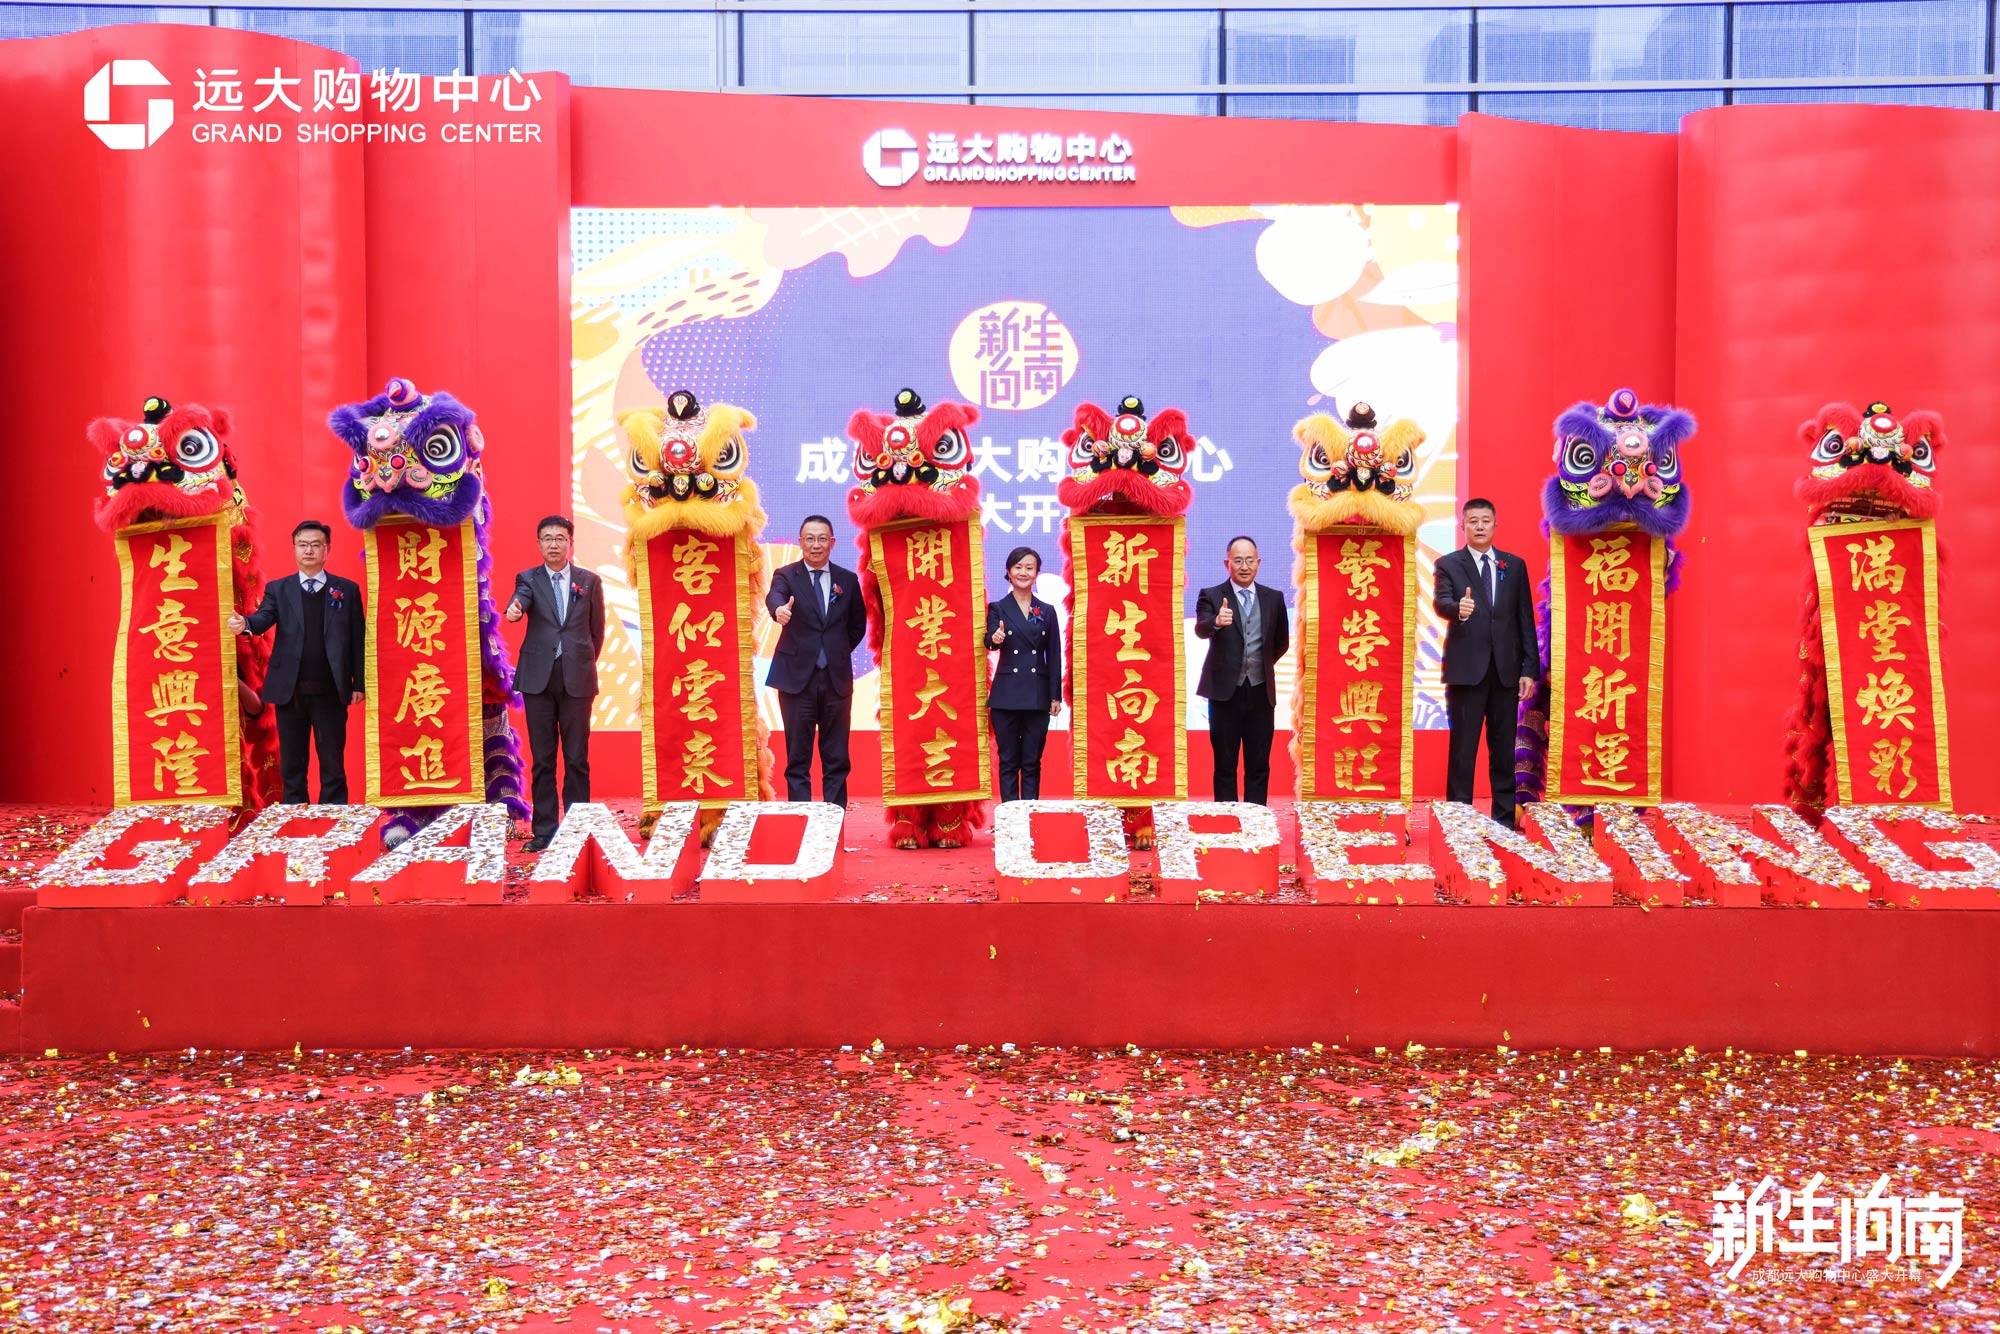 Grand Opening of Chengdu Grand Shopping Center Forging a "New Epicenter on the axis of the City of Paradise”